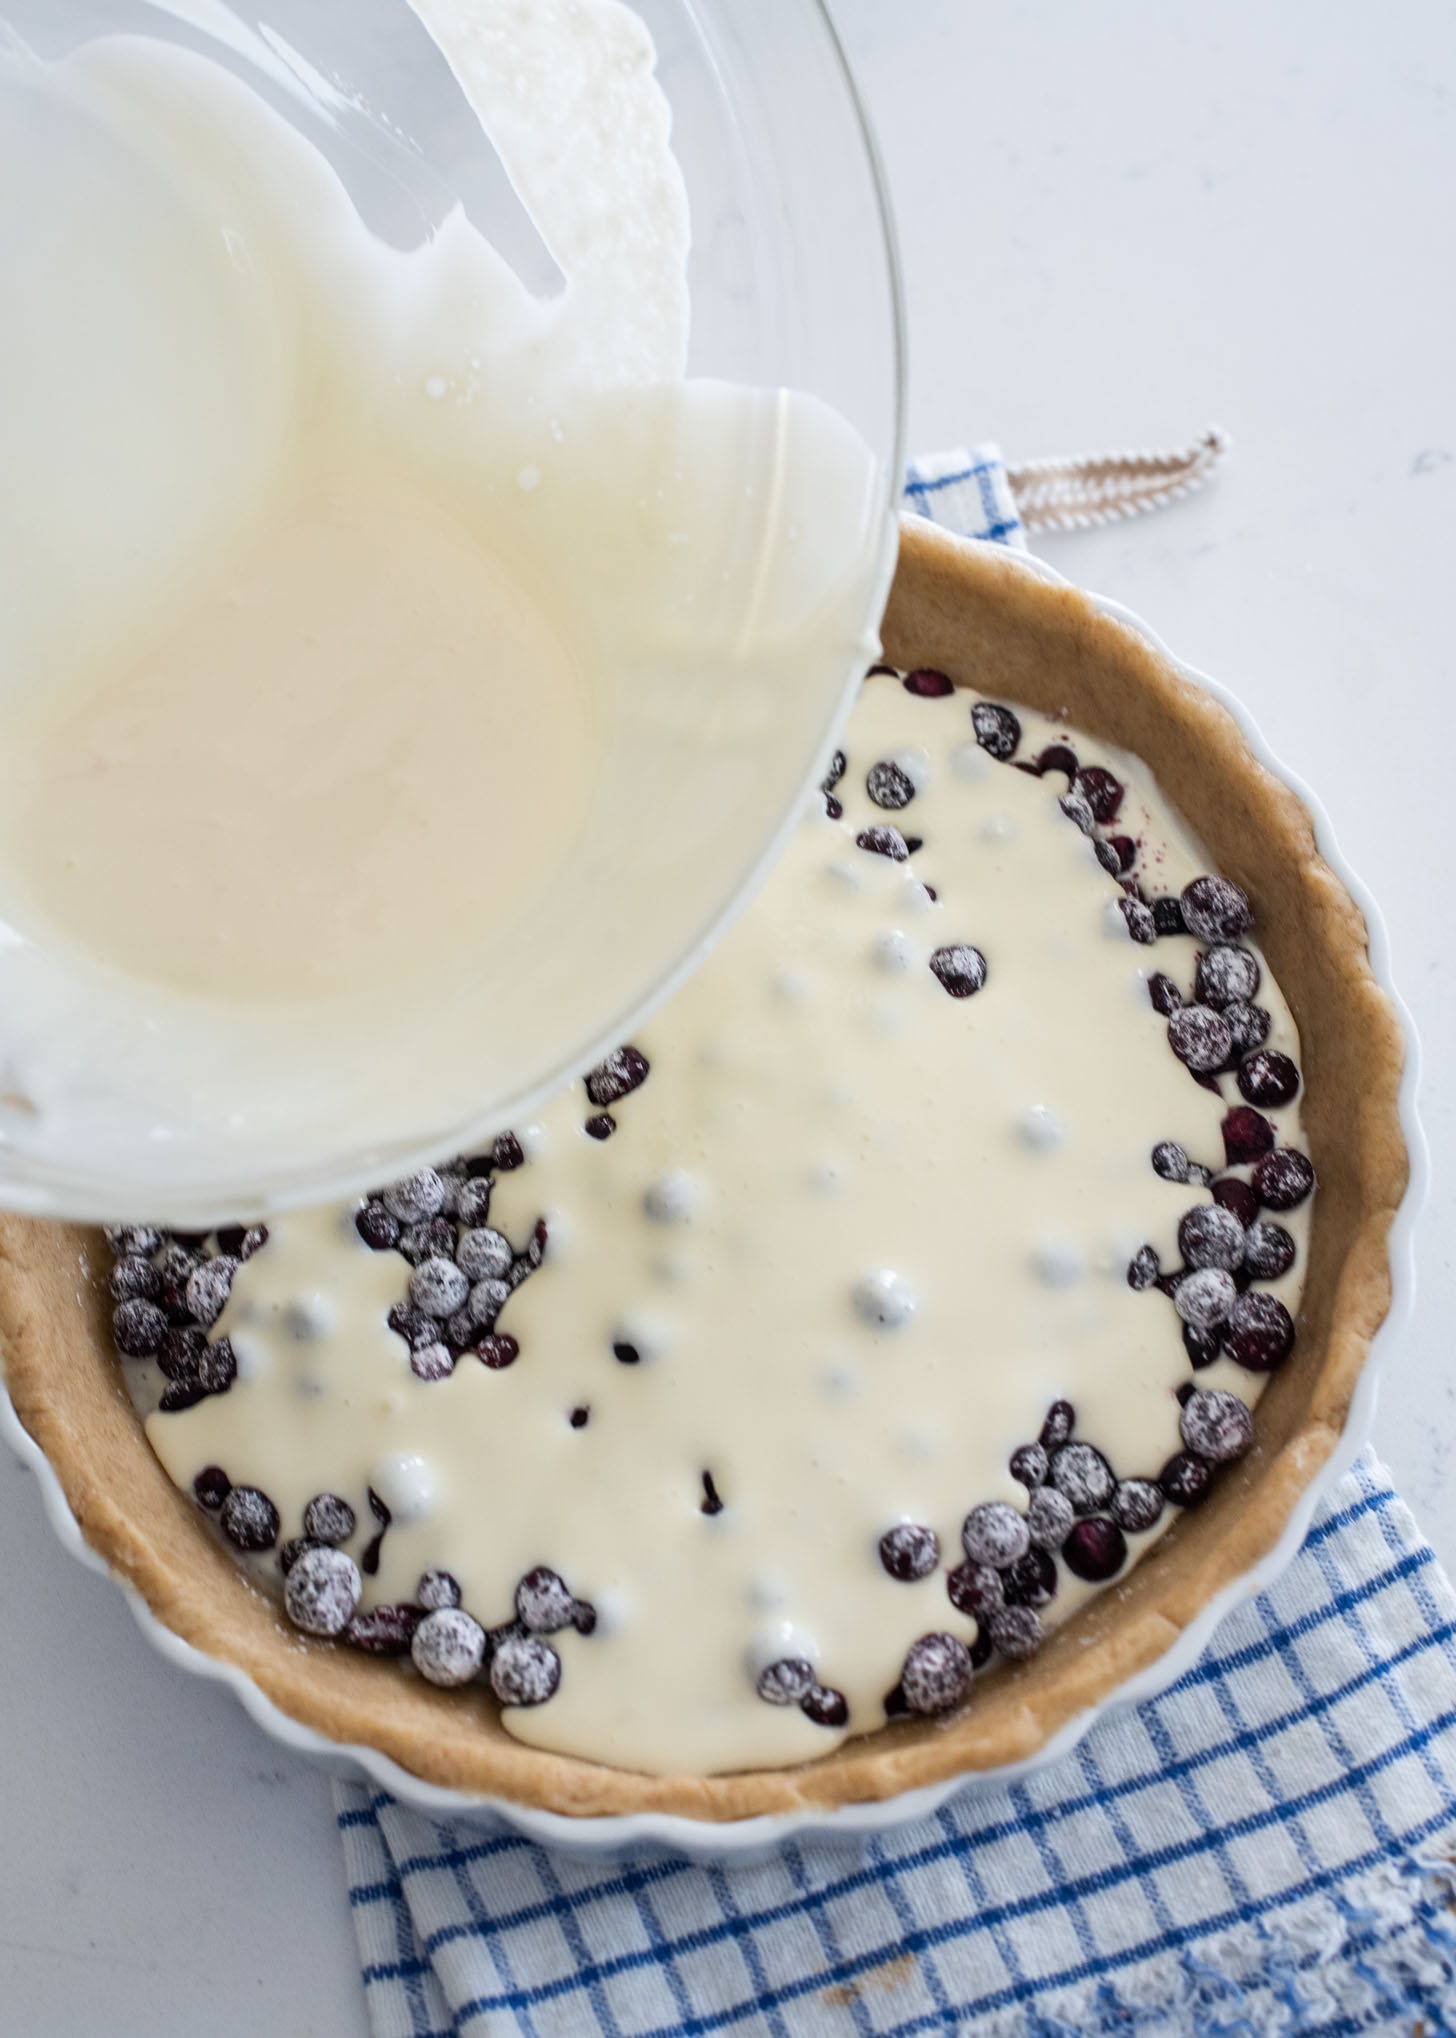 Remaining cream filling is being poured over the blueberries in a pie crust.